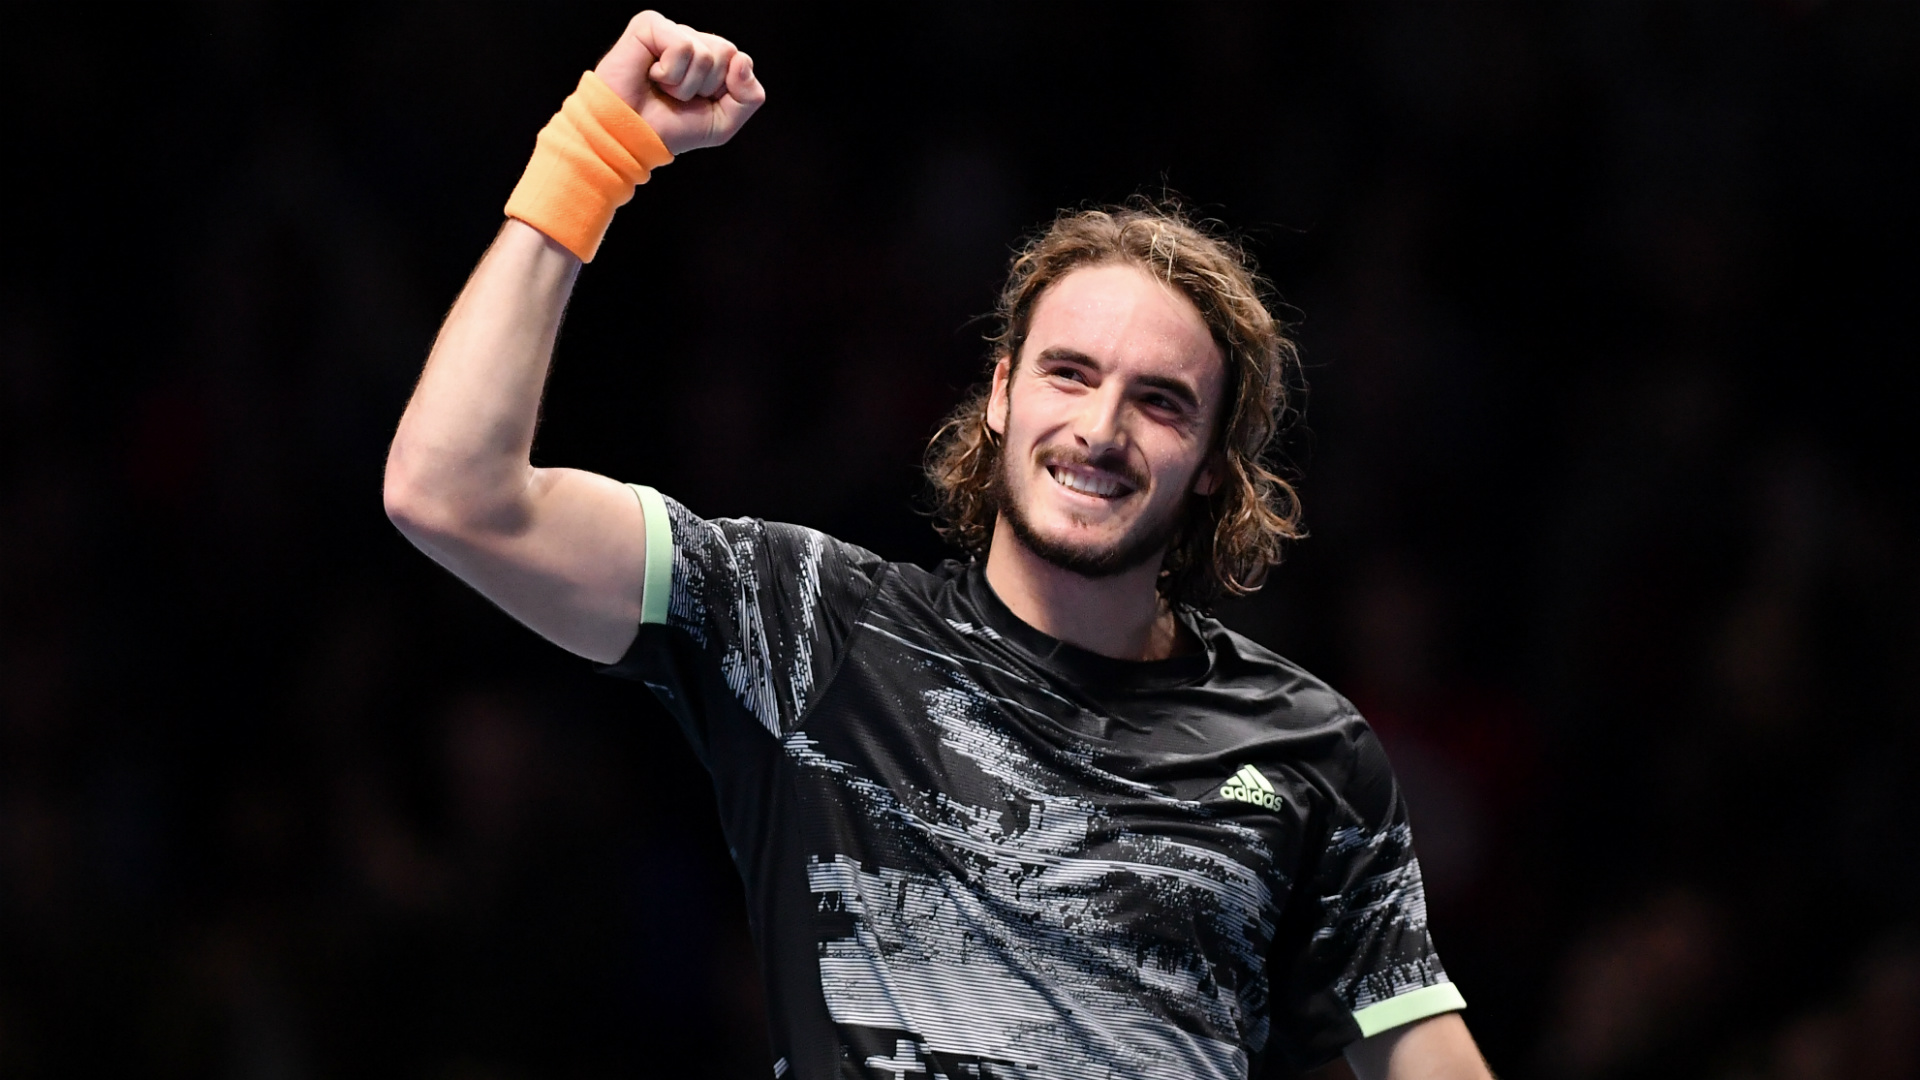 Defeating Roger Federer in the ATP Finals had Stefanos Tsitsipas acknowledging the scale of his achievement.